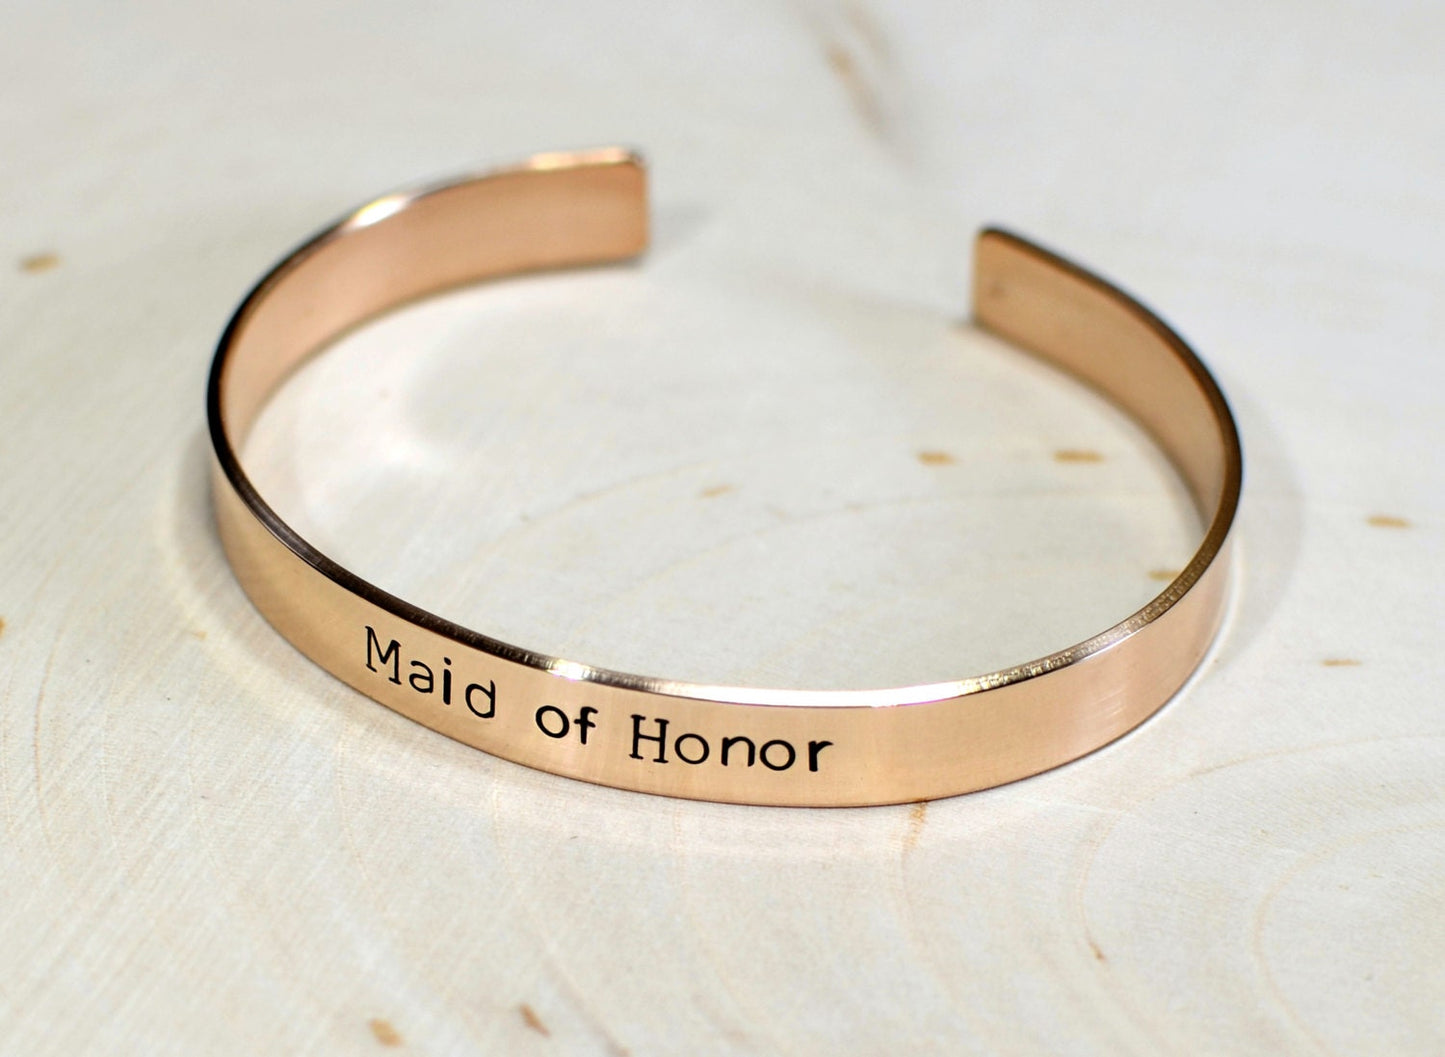 Bronze cuff bracelet with personalized engravings